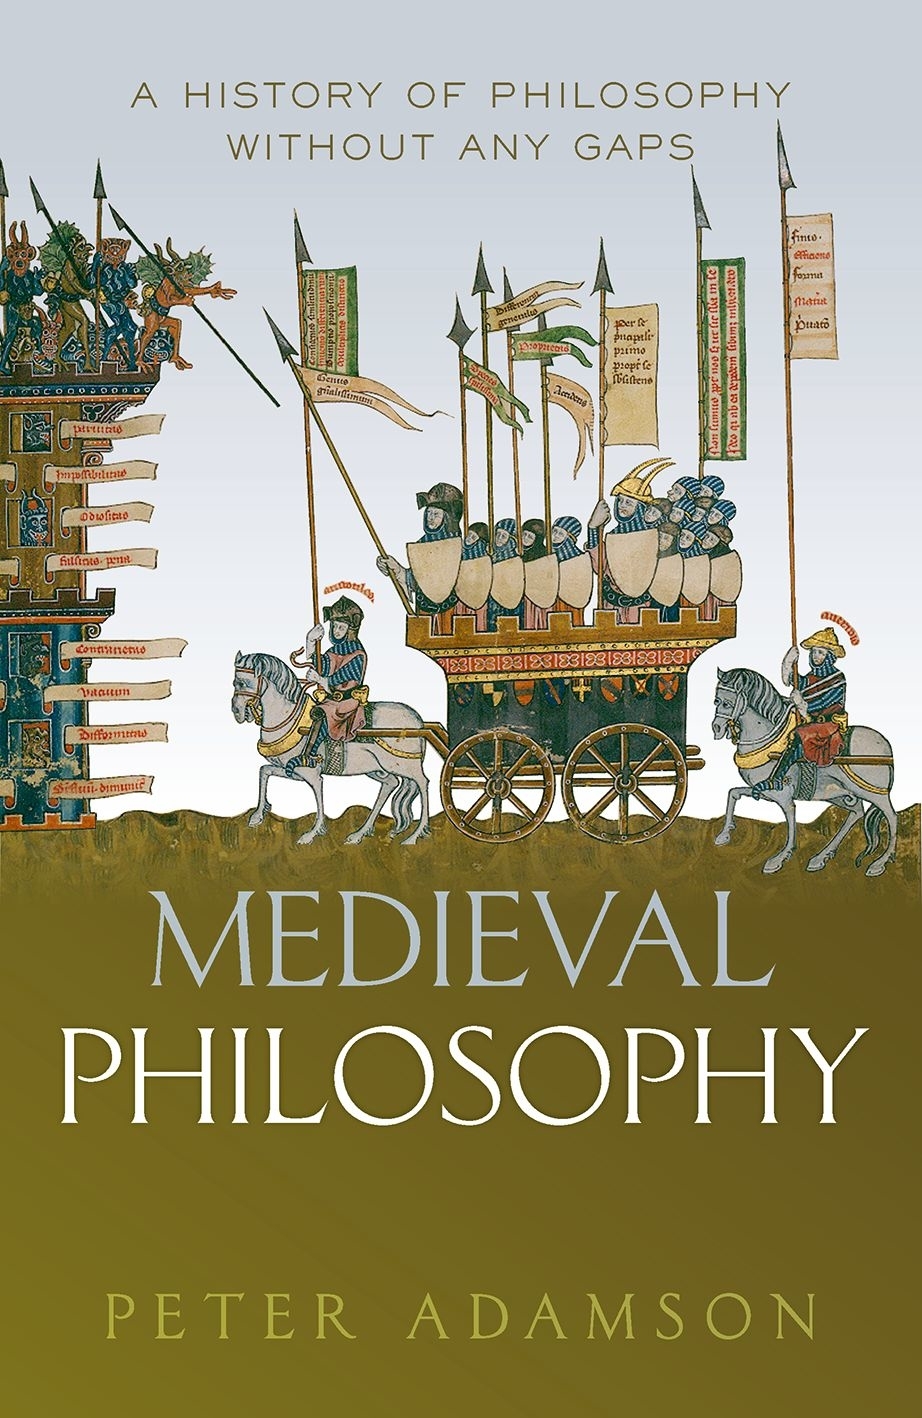 Medieval Philosophy: A History of Philosophy without Any Gaps